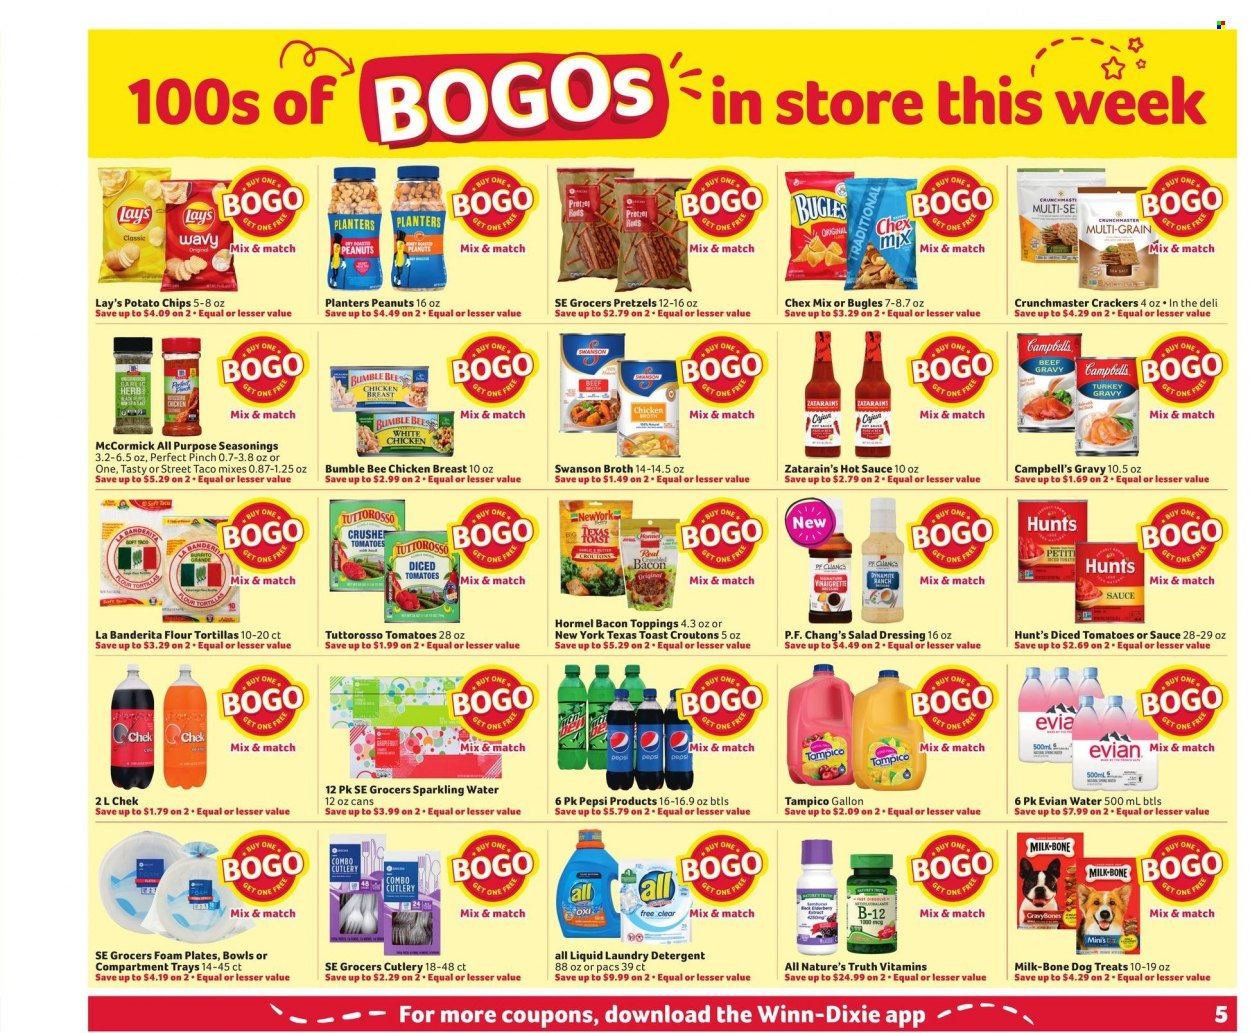 thumbnail - Winn Dixie Flyer - 11/03/2021 - 11/09/2021 - Sales products - tortillas, pretzels, flour tortillas, tomatoes, beef gravy, Campbell's, Bumble Bee, burrito, Hormel, bacon, milk, crackers, potato chips, chips, Lay’s, Chex Mix, croutons, salt, broth, gravy mix, salad dressing, vinaigrette dressing, hot sauce, dressing, roasted peanuts, peanuts, Planters, Pepsi, fruit punch, sparkling water, Evian, detergent, laundry detergent, plate, foam plates, Dixie, Nature's Truth. Page 5.